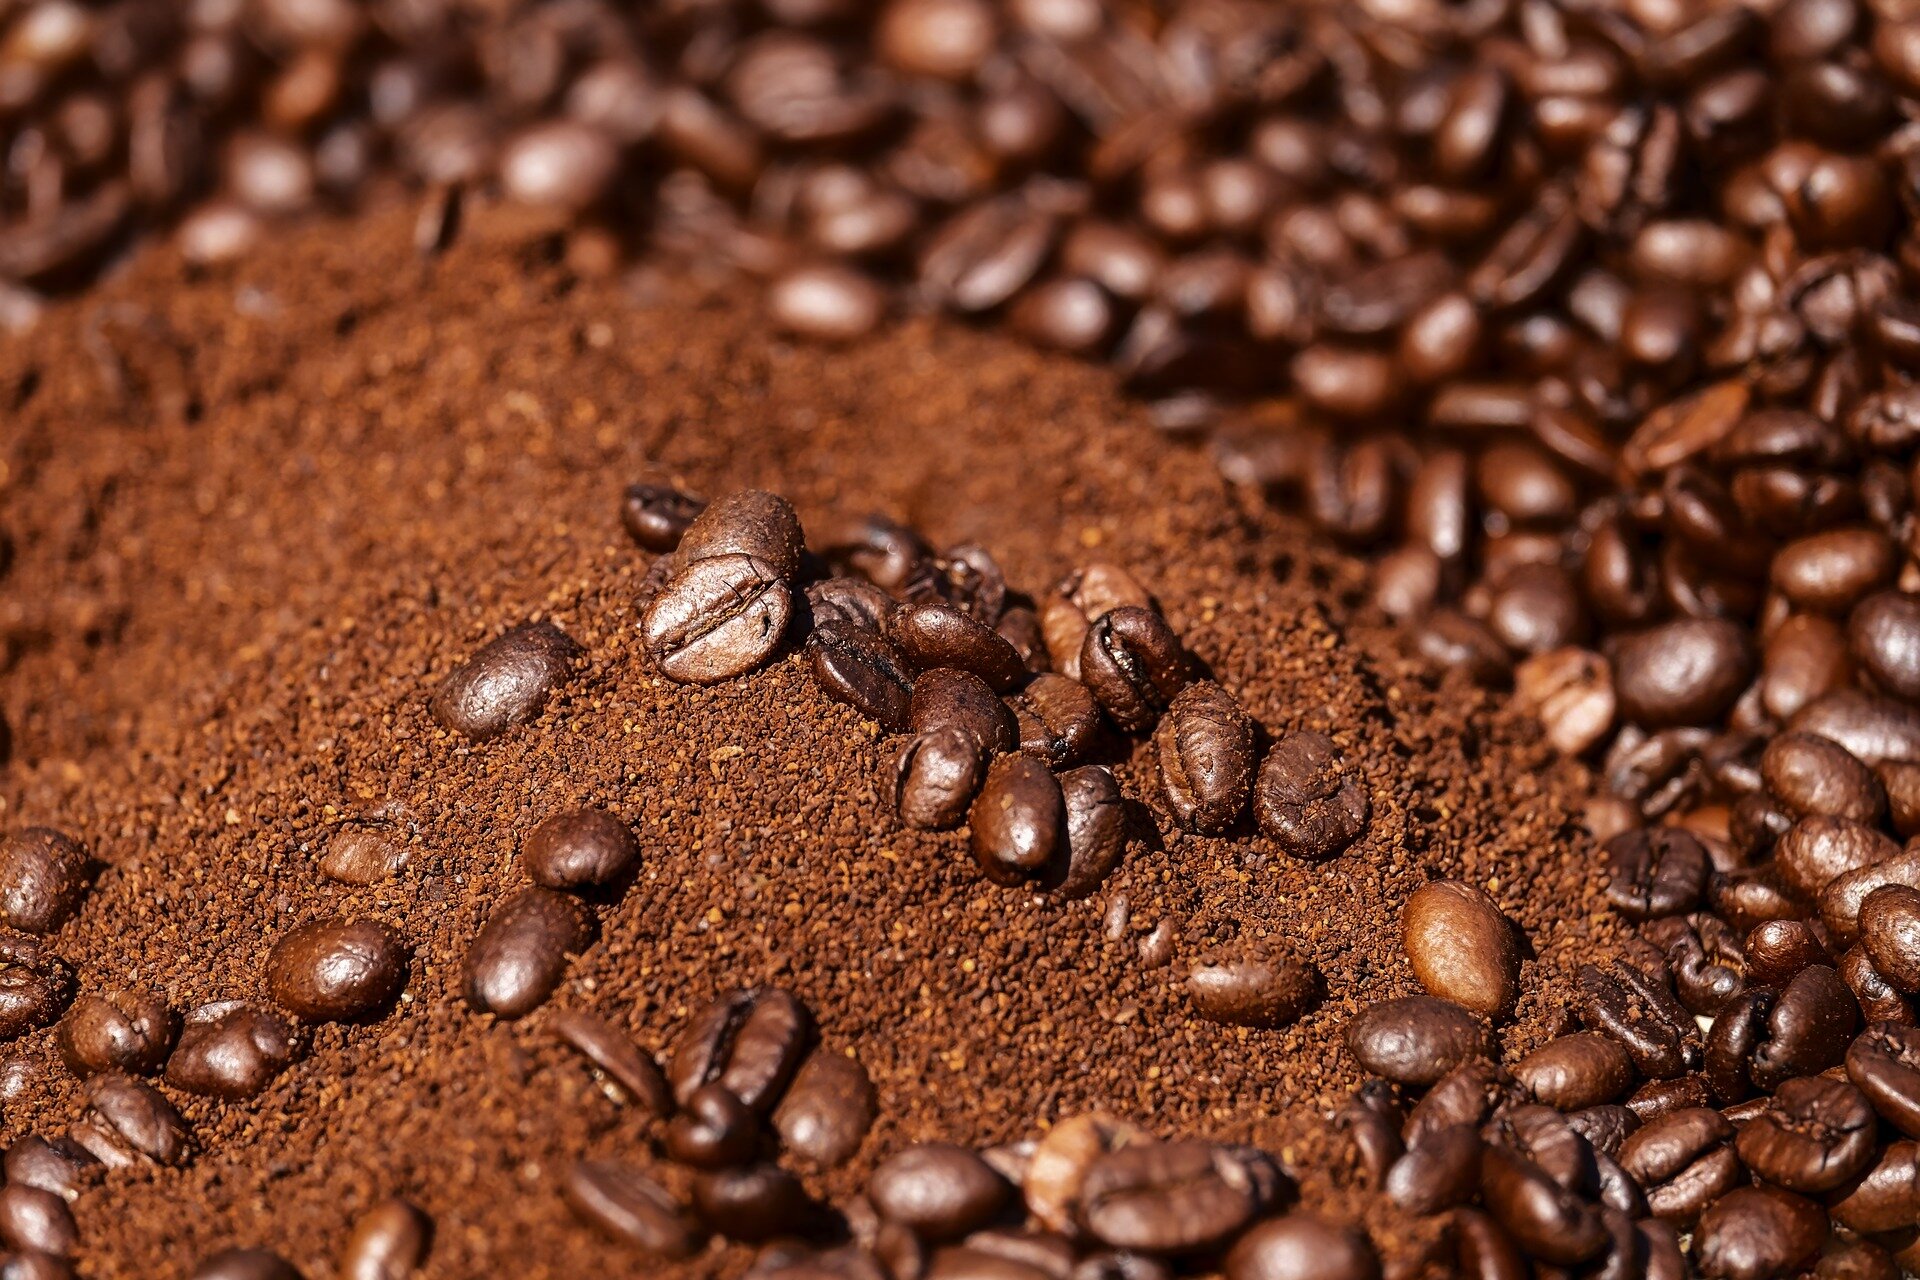 Ground coffee may be key to preventing neurodegenerative diseases